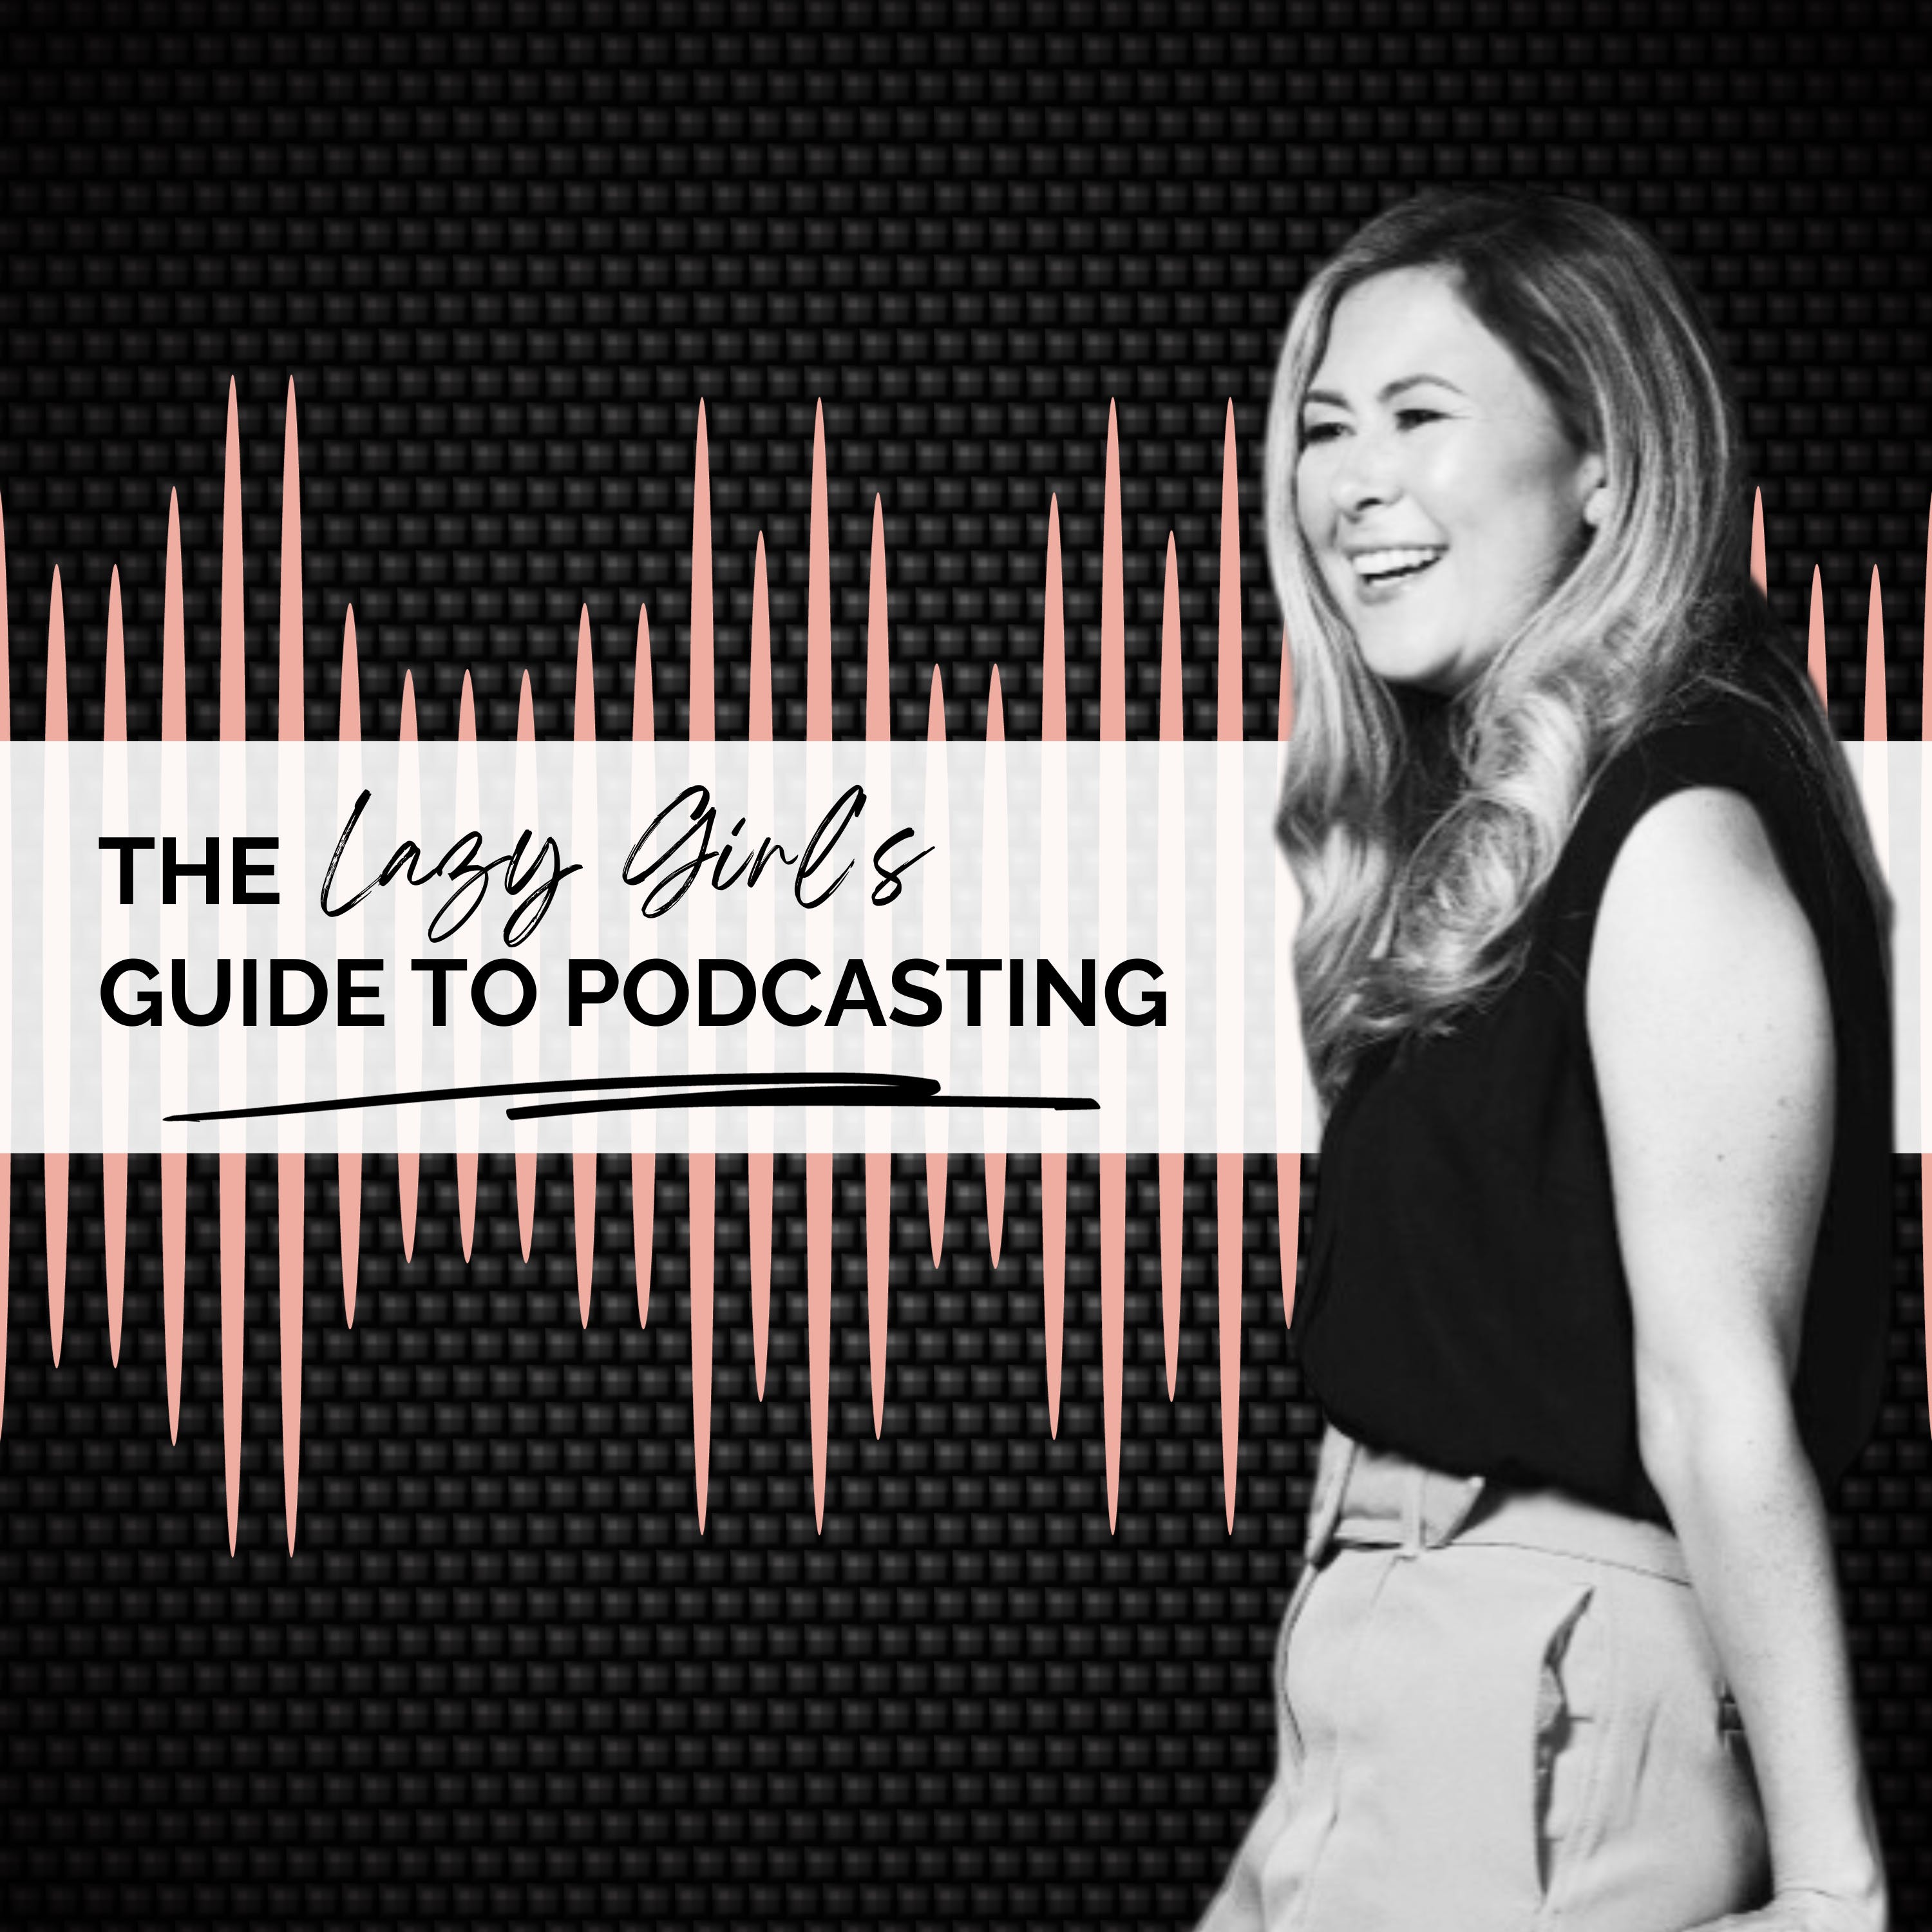 Artwork for The Lazy Girl's Guide to Podcasting: A Podcast about Podcasting and Podcasting Tips